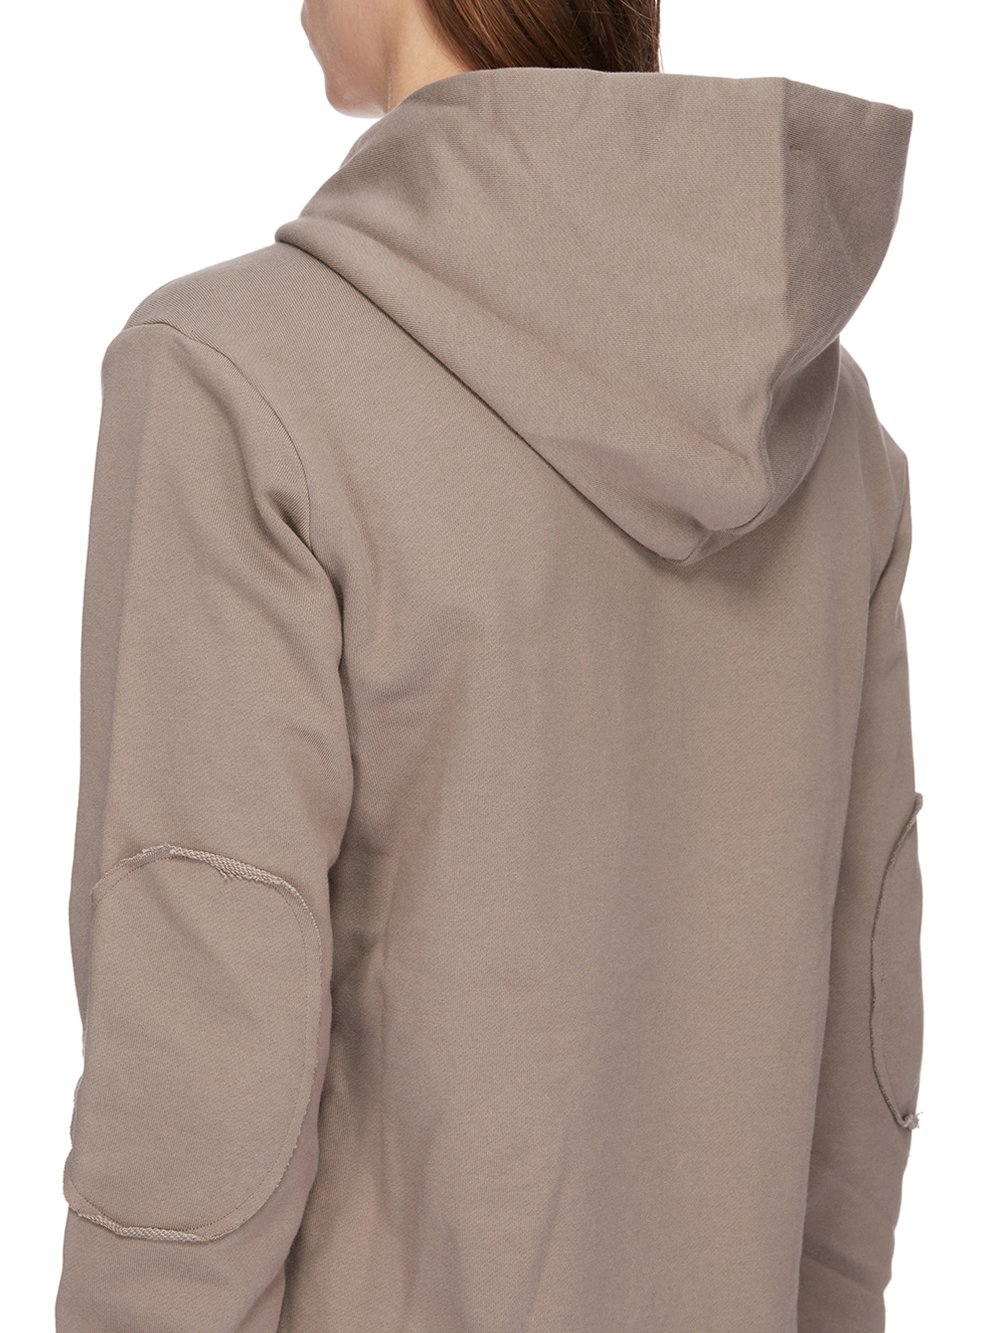 CHAMPION X RICK OWENS HOODED BODY IN DUST GREY COMPACT COTTON FELPA